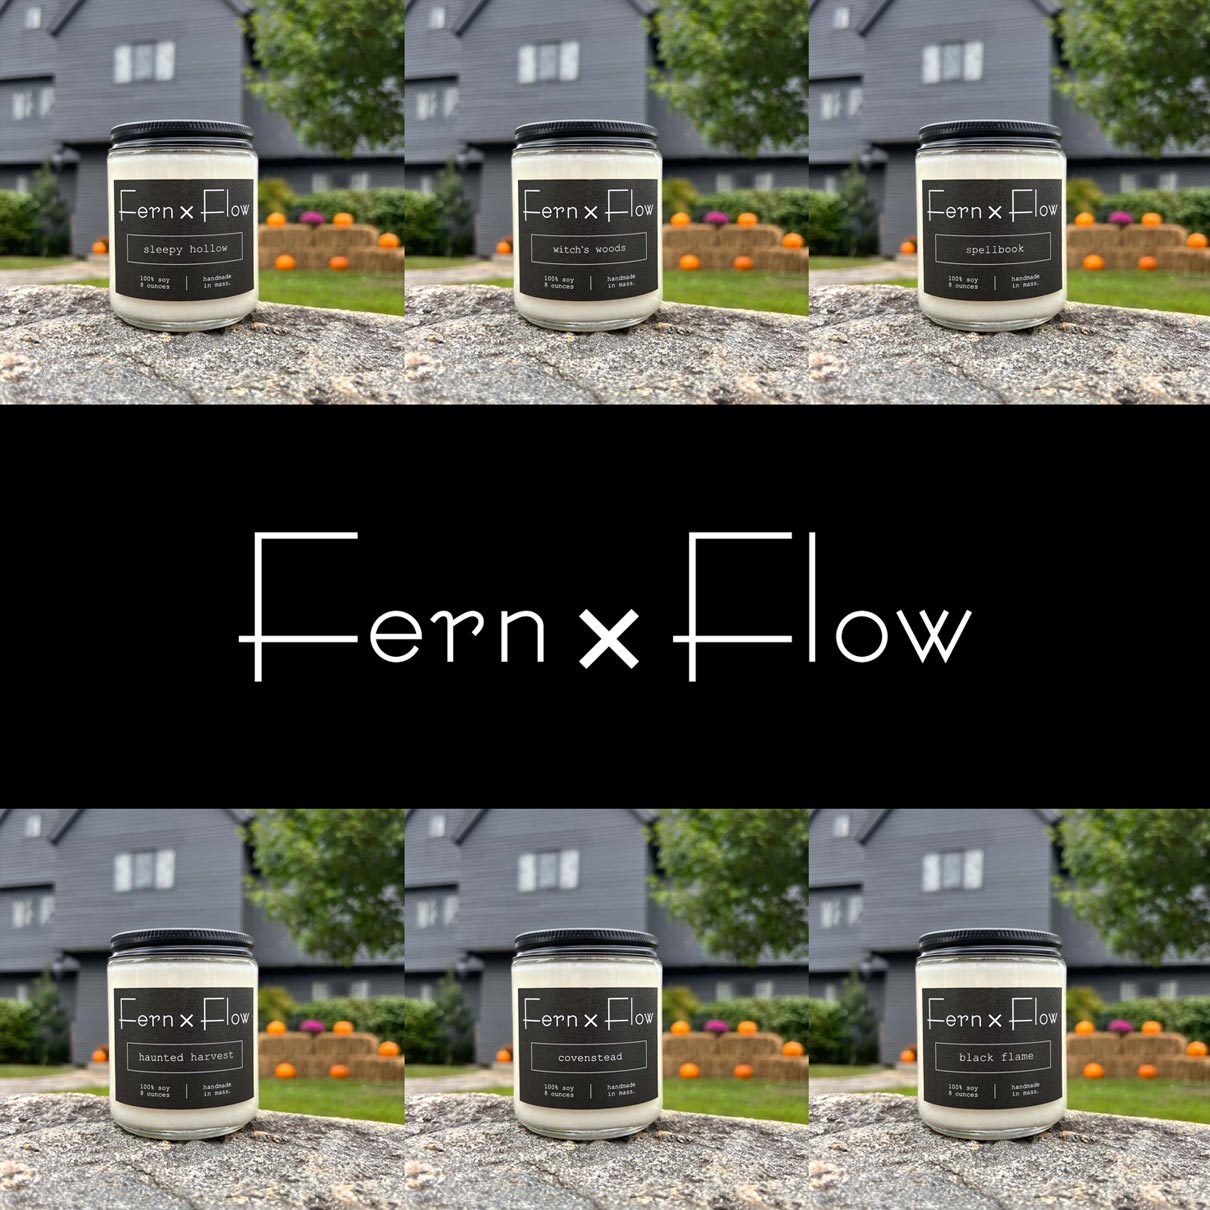 
                  
                    Fern x Flow Halloween Candle Collection, featuring six Halloween-inspired vegan, soy candles all in front of the Salem Witch House in Salem, Massachusetts Sleepy Hollow, Witch's Woods, Spellbook, Haunted Harvest, Covenstead, and Black Flame.
                  
                